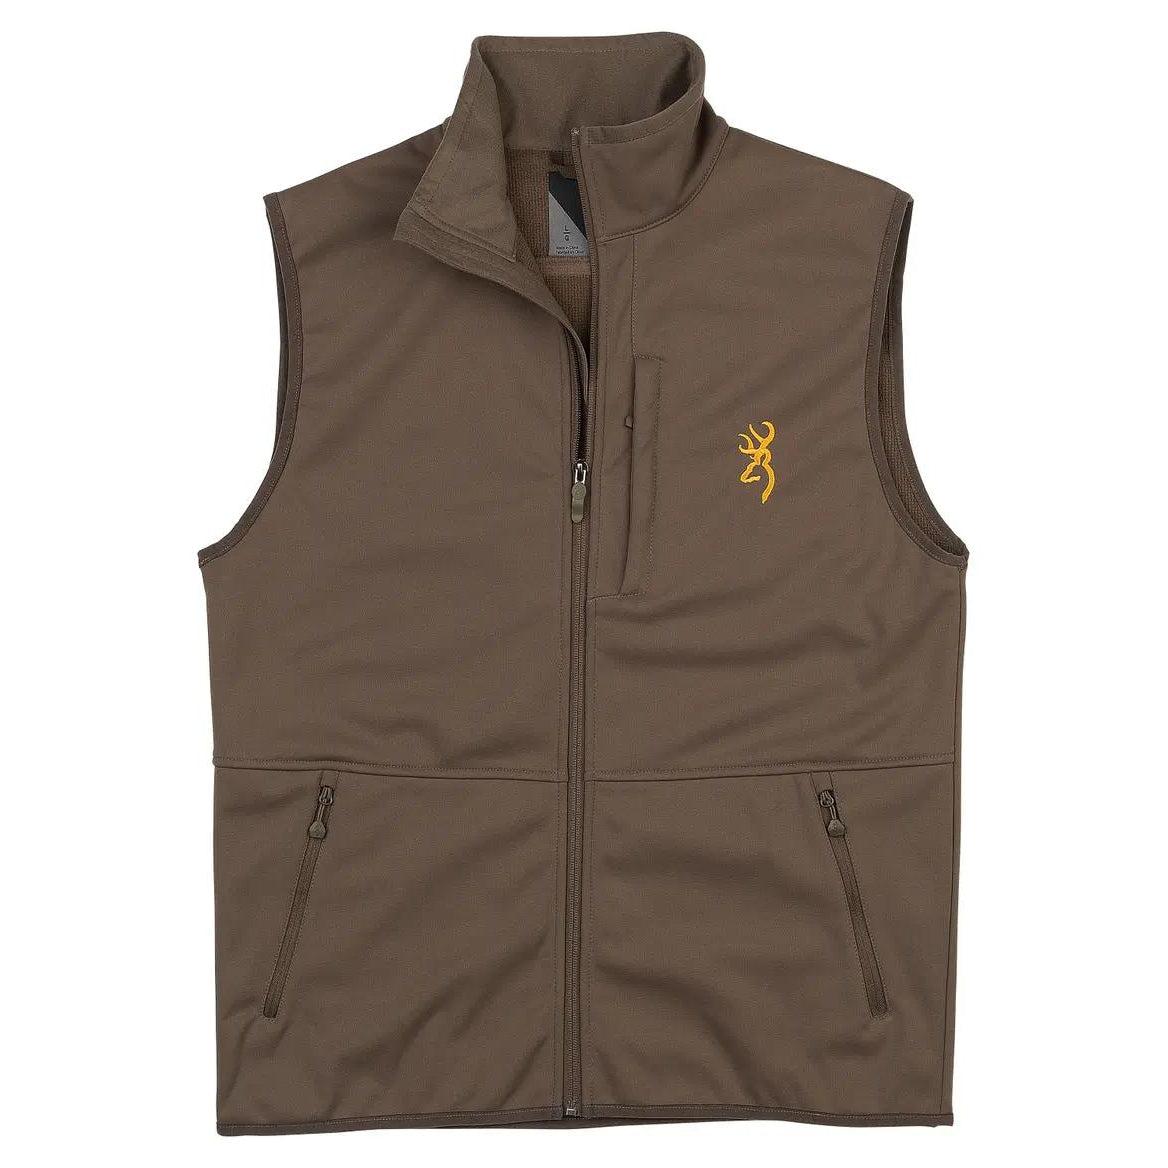 Browning Soft Shell Vest-Men's Clothing-Major Brown-M-Kevin's Fine Outdoor Gear & Apparel